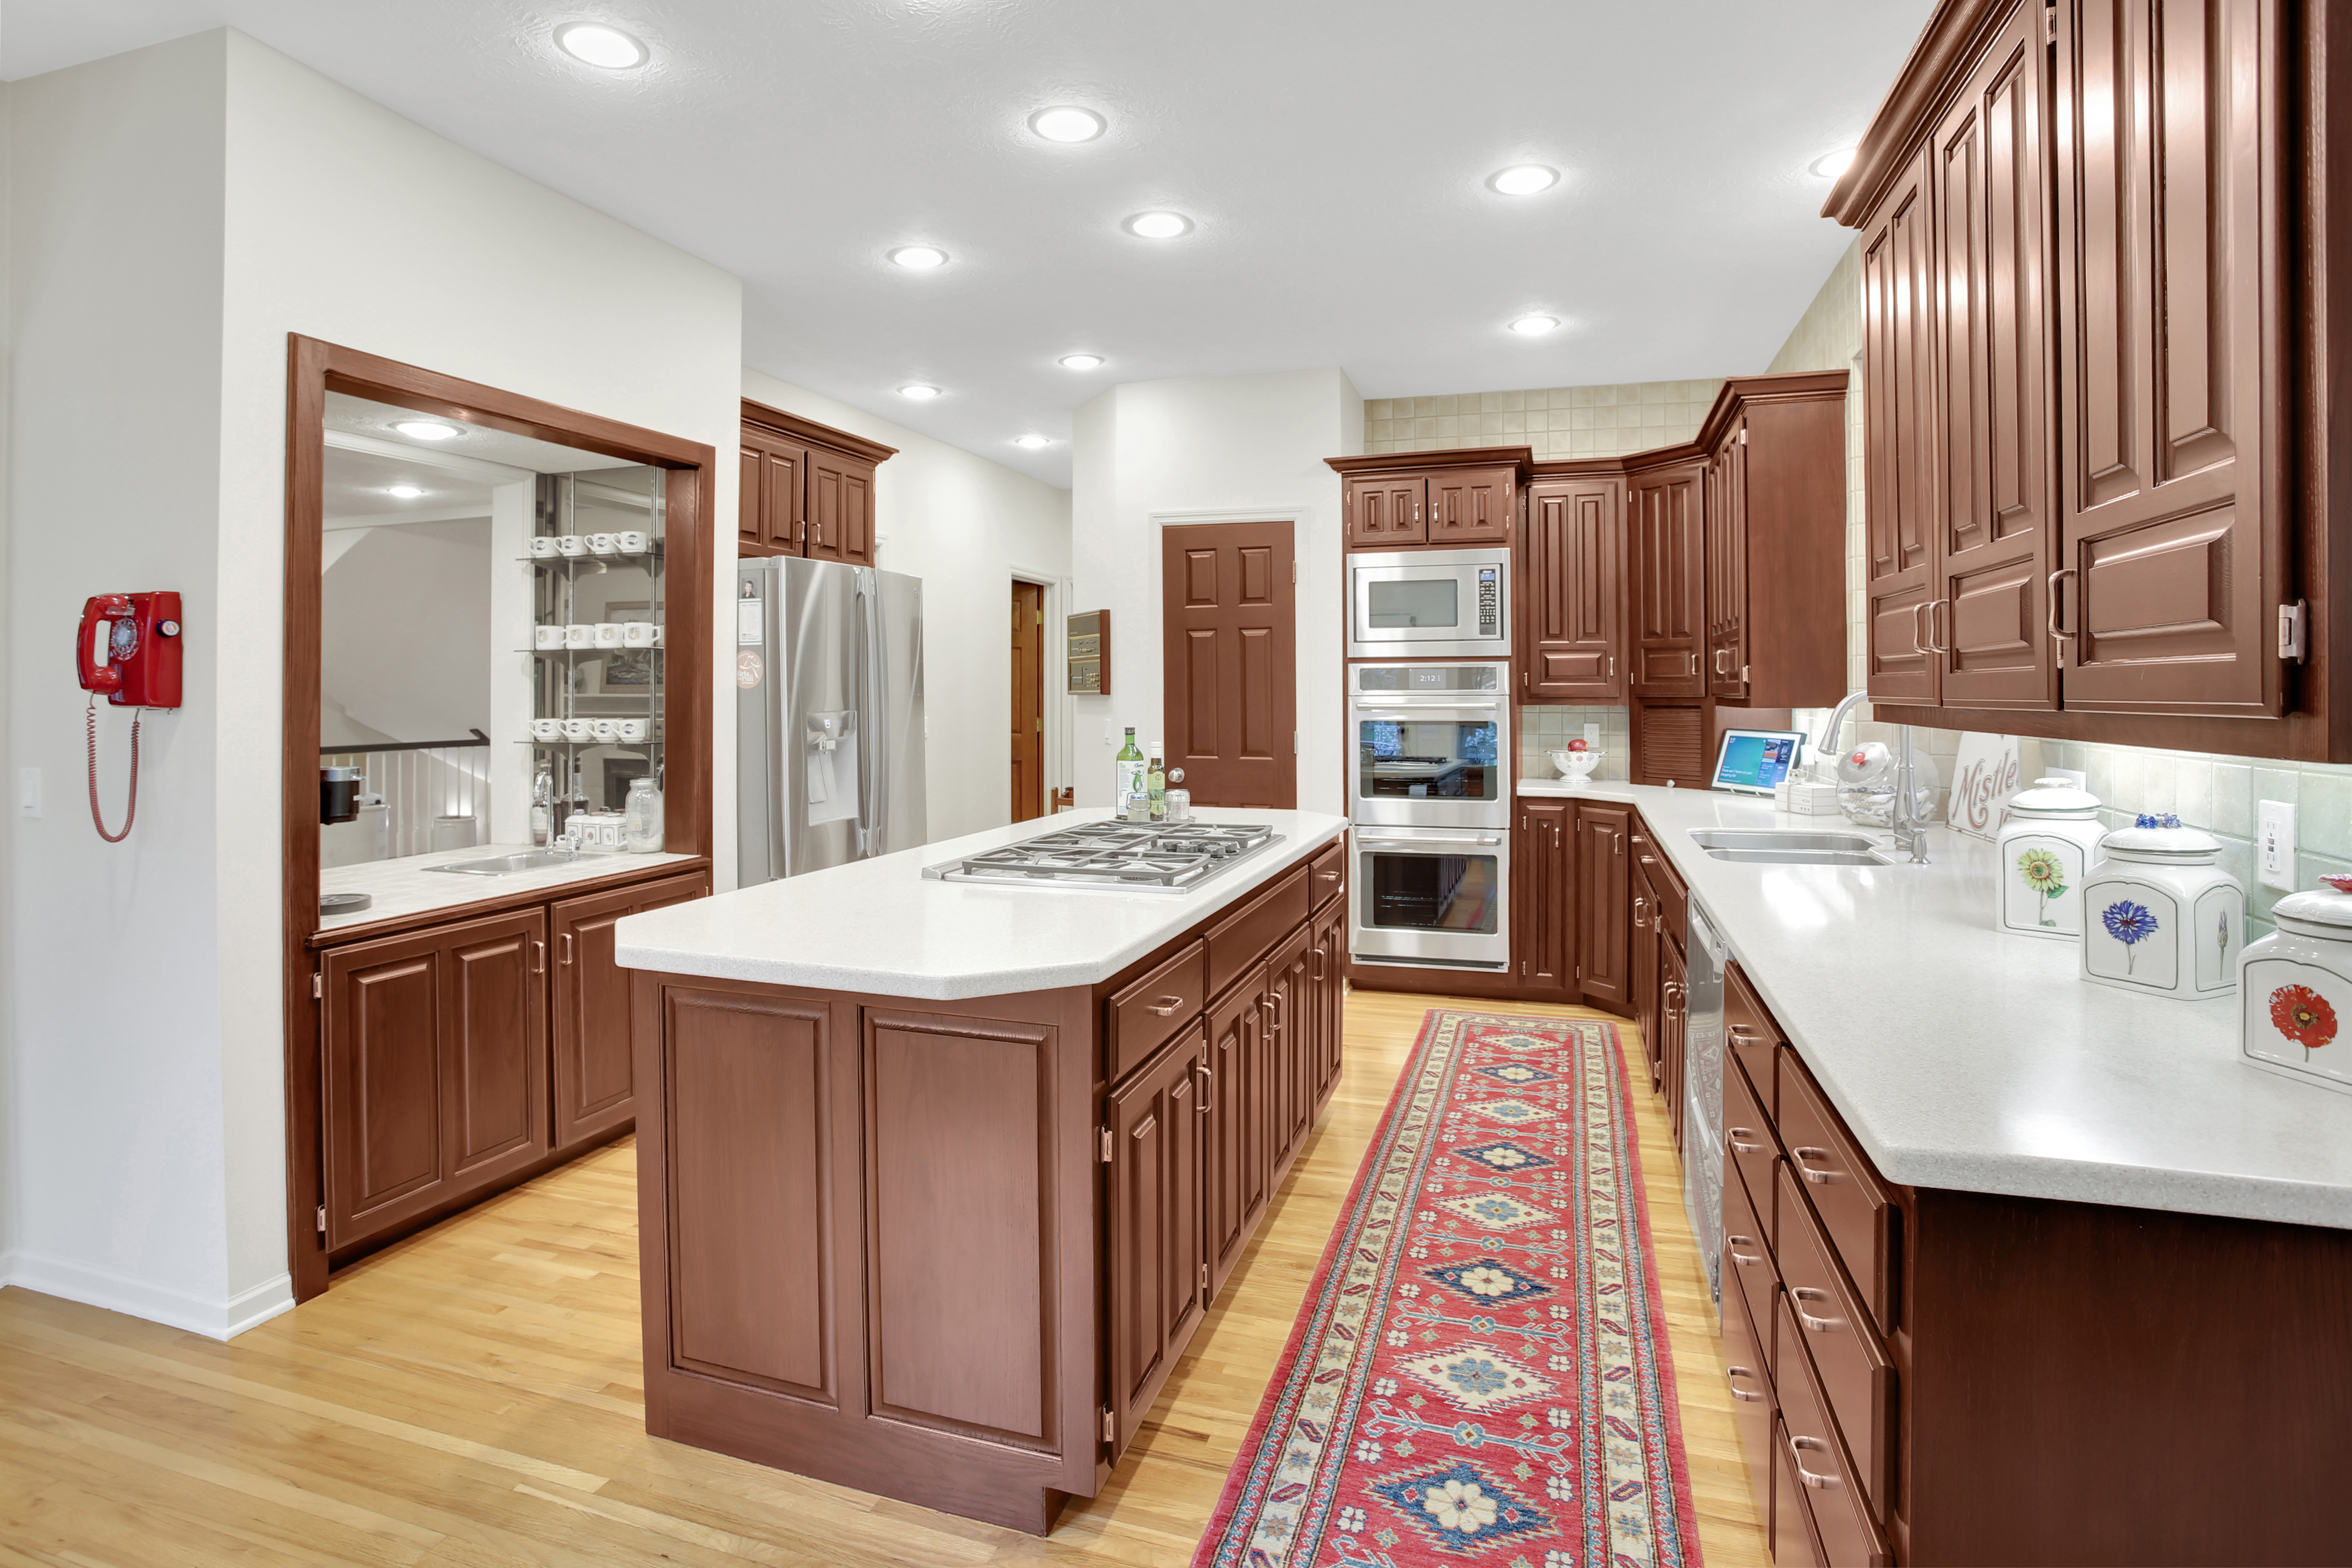 Large kitchen with warm brown toned cabinets.